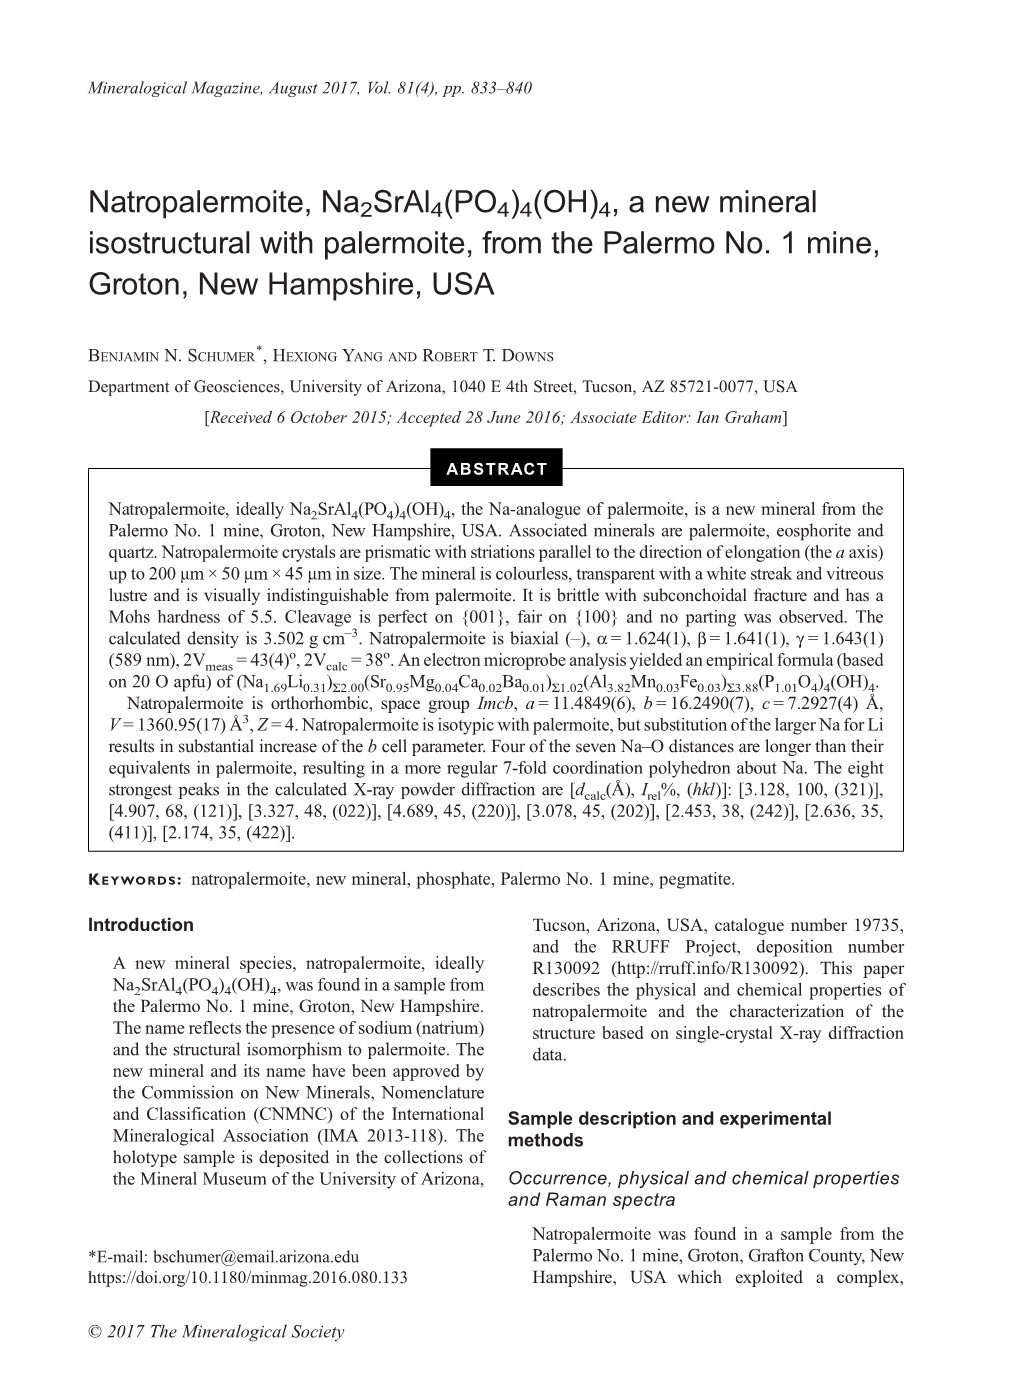 Natropalermoite, Na2sral4(PO4)4(OH)4, a New Mineral Isostructural with Palermoite, from the Palermo No